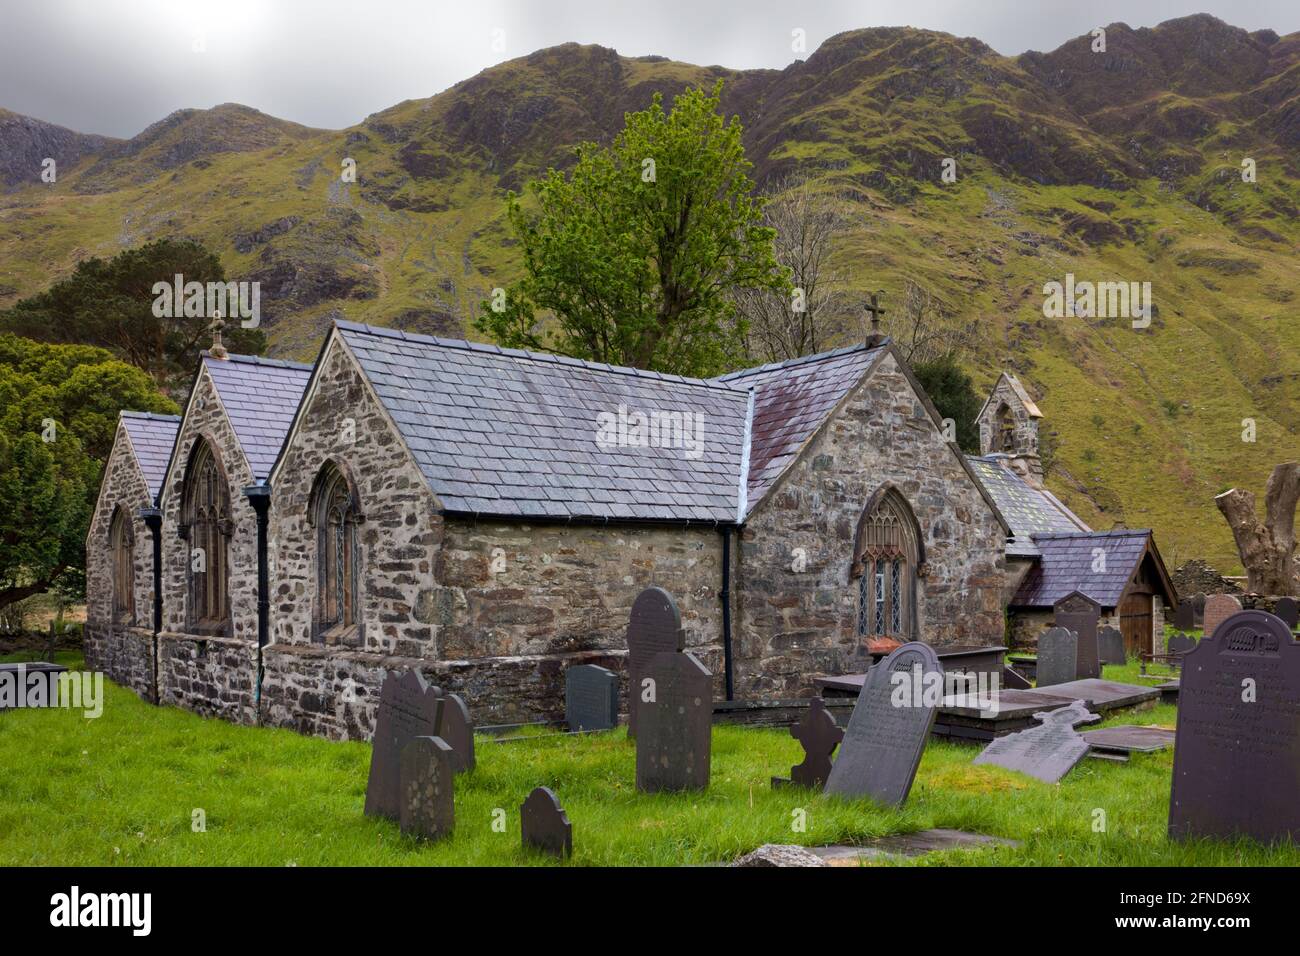 St Peris Church in the village Nant Peris, Snowdonia, North Wales, dates from at least the 14th century. Stock Photo